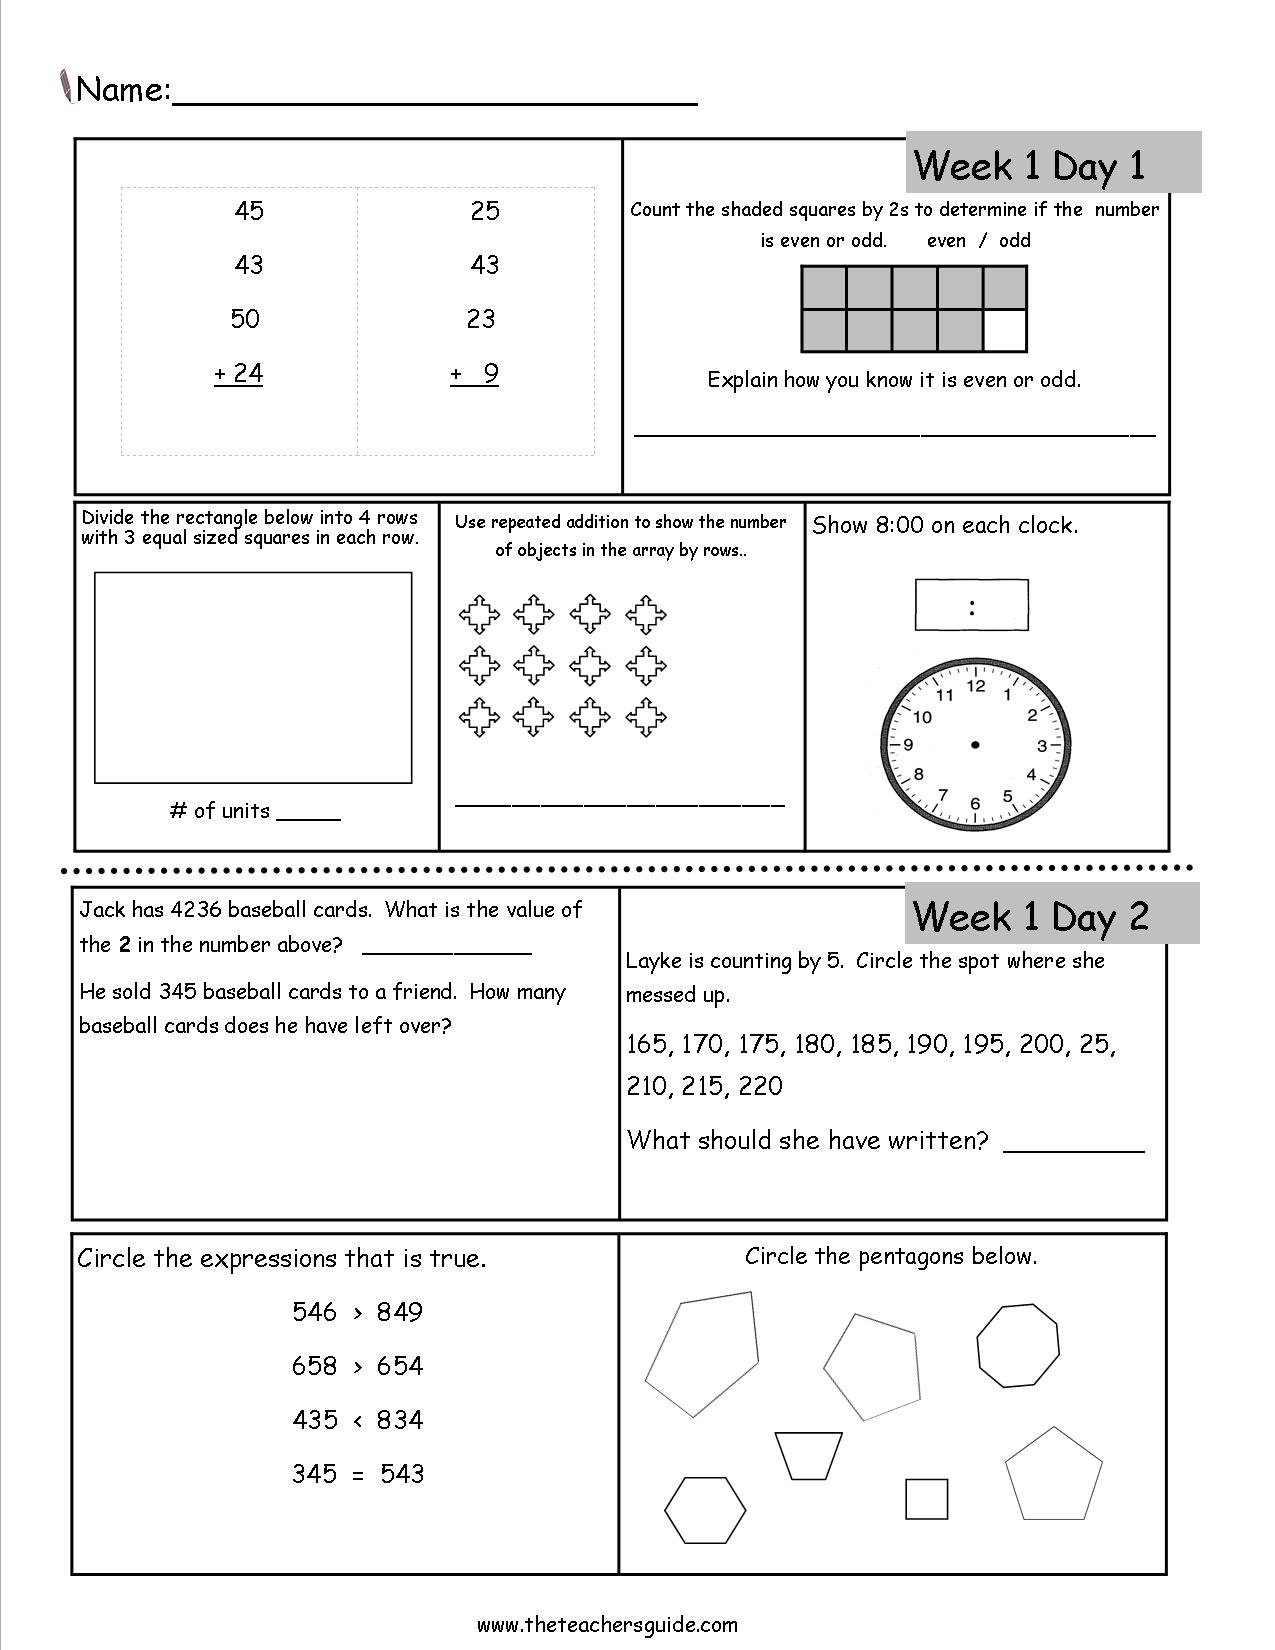 third-grade-common-core-worksheets-common-core-worksheets